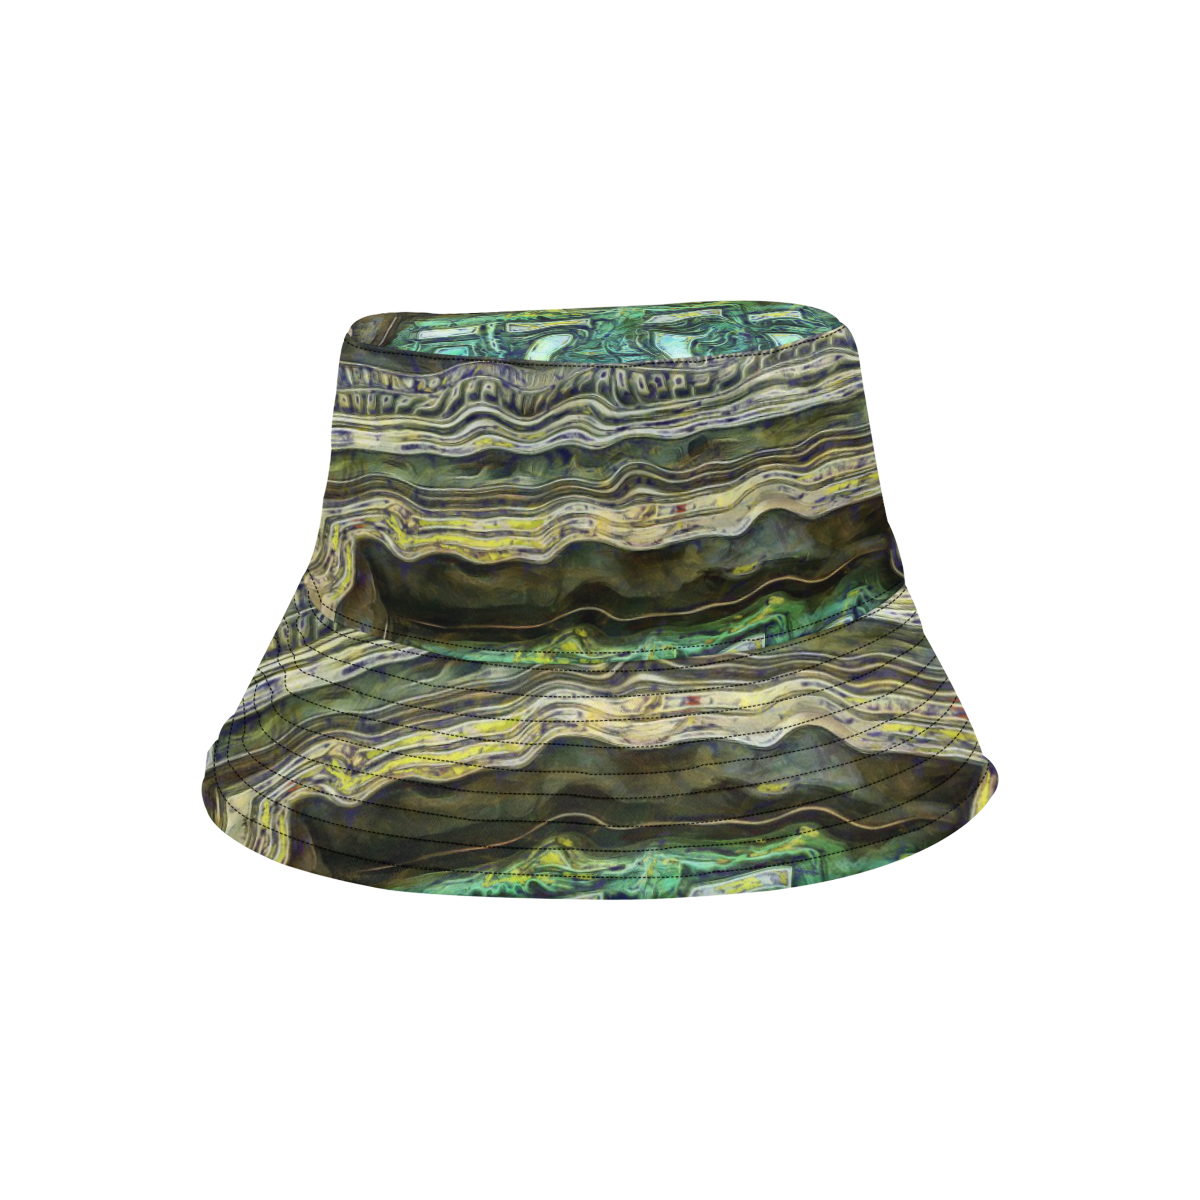 Cathedral Door in Rome Italy KPA All Over Print Bucket Hat